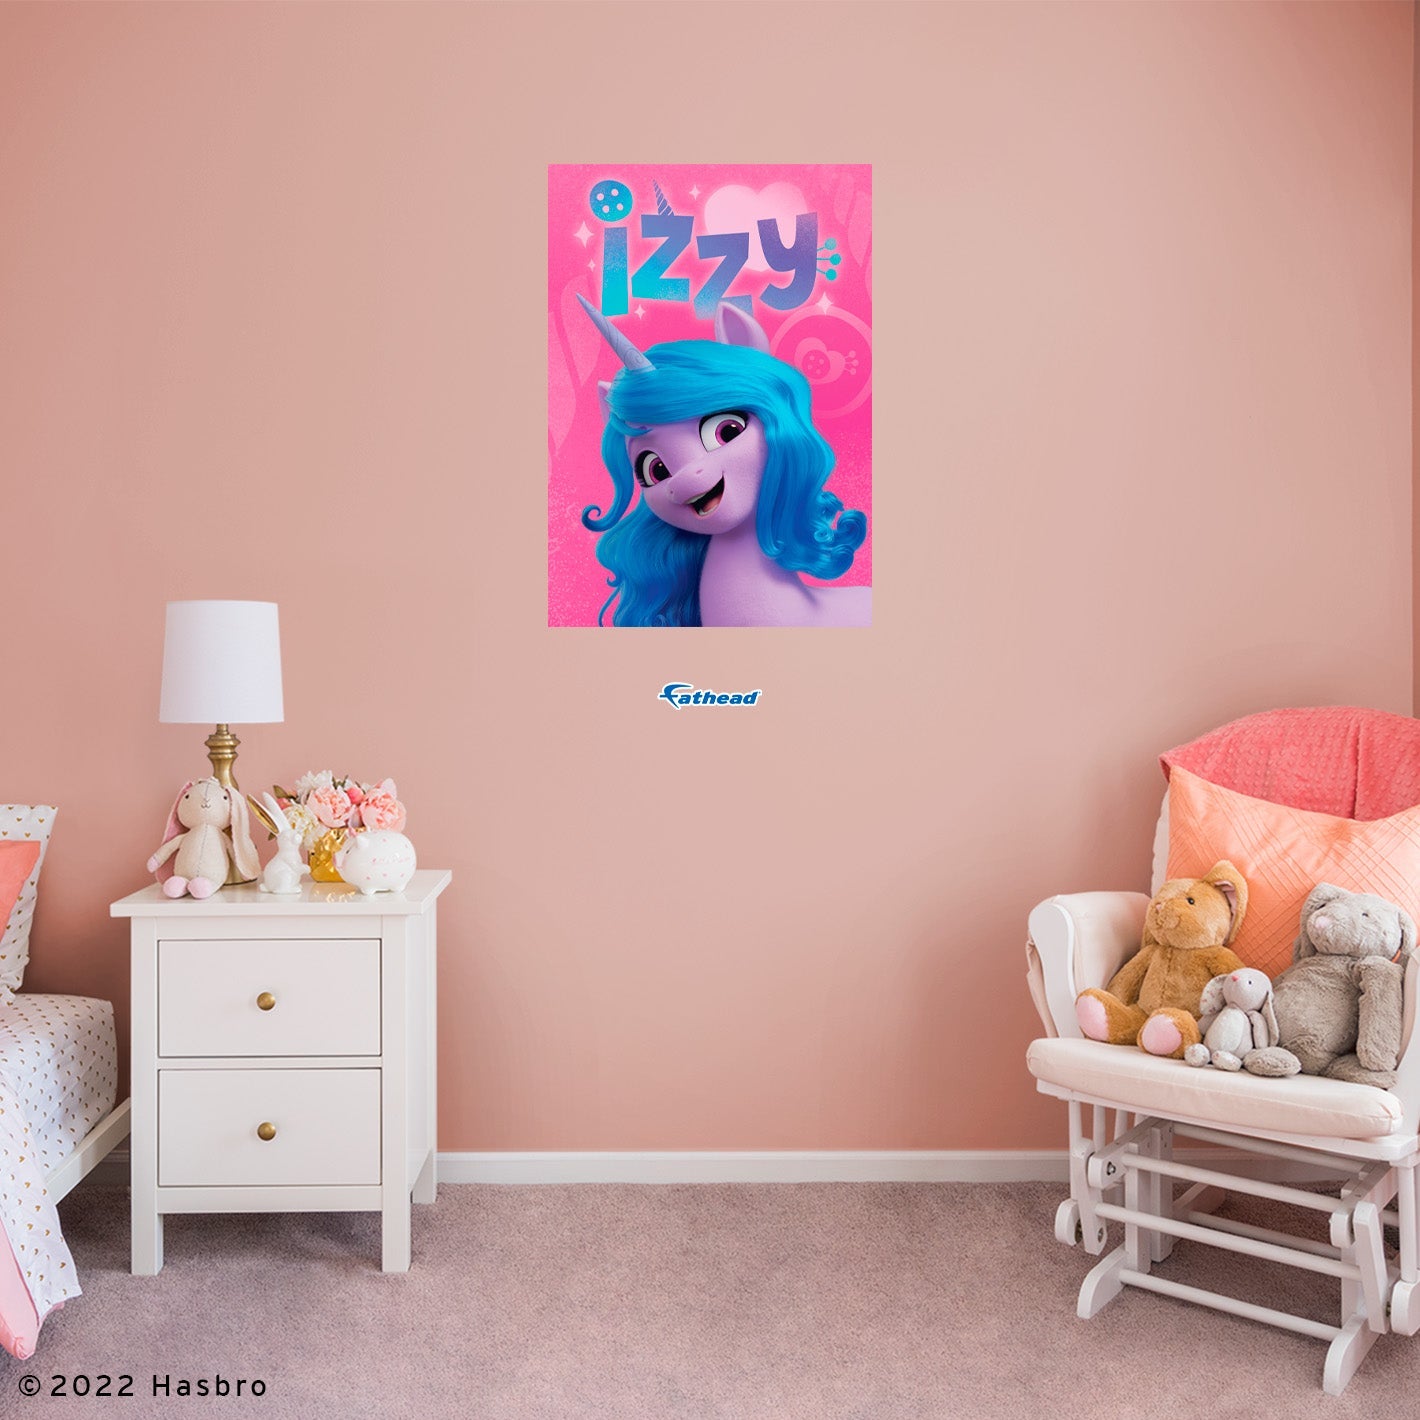 My Little Pony Movie 2: Izzy Poster - Officially Licensed Hasbro Removable Adhesive Decal